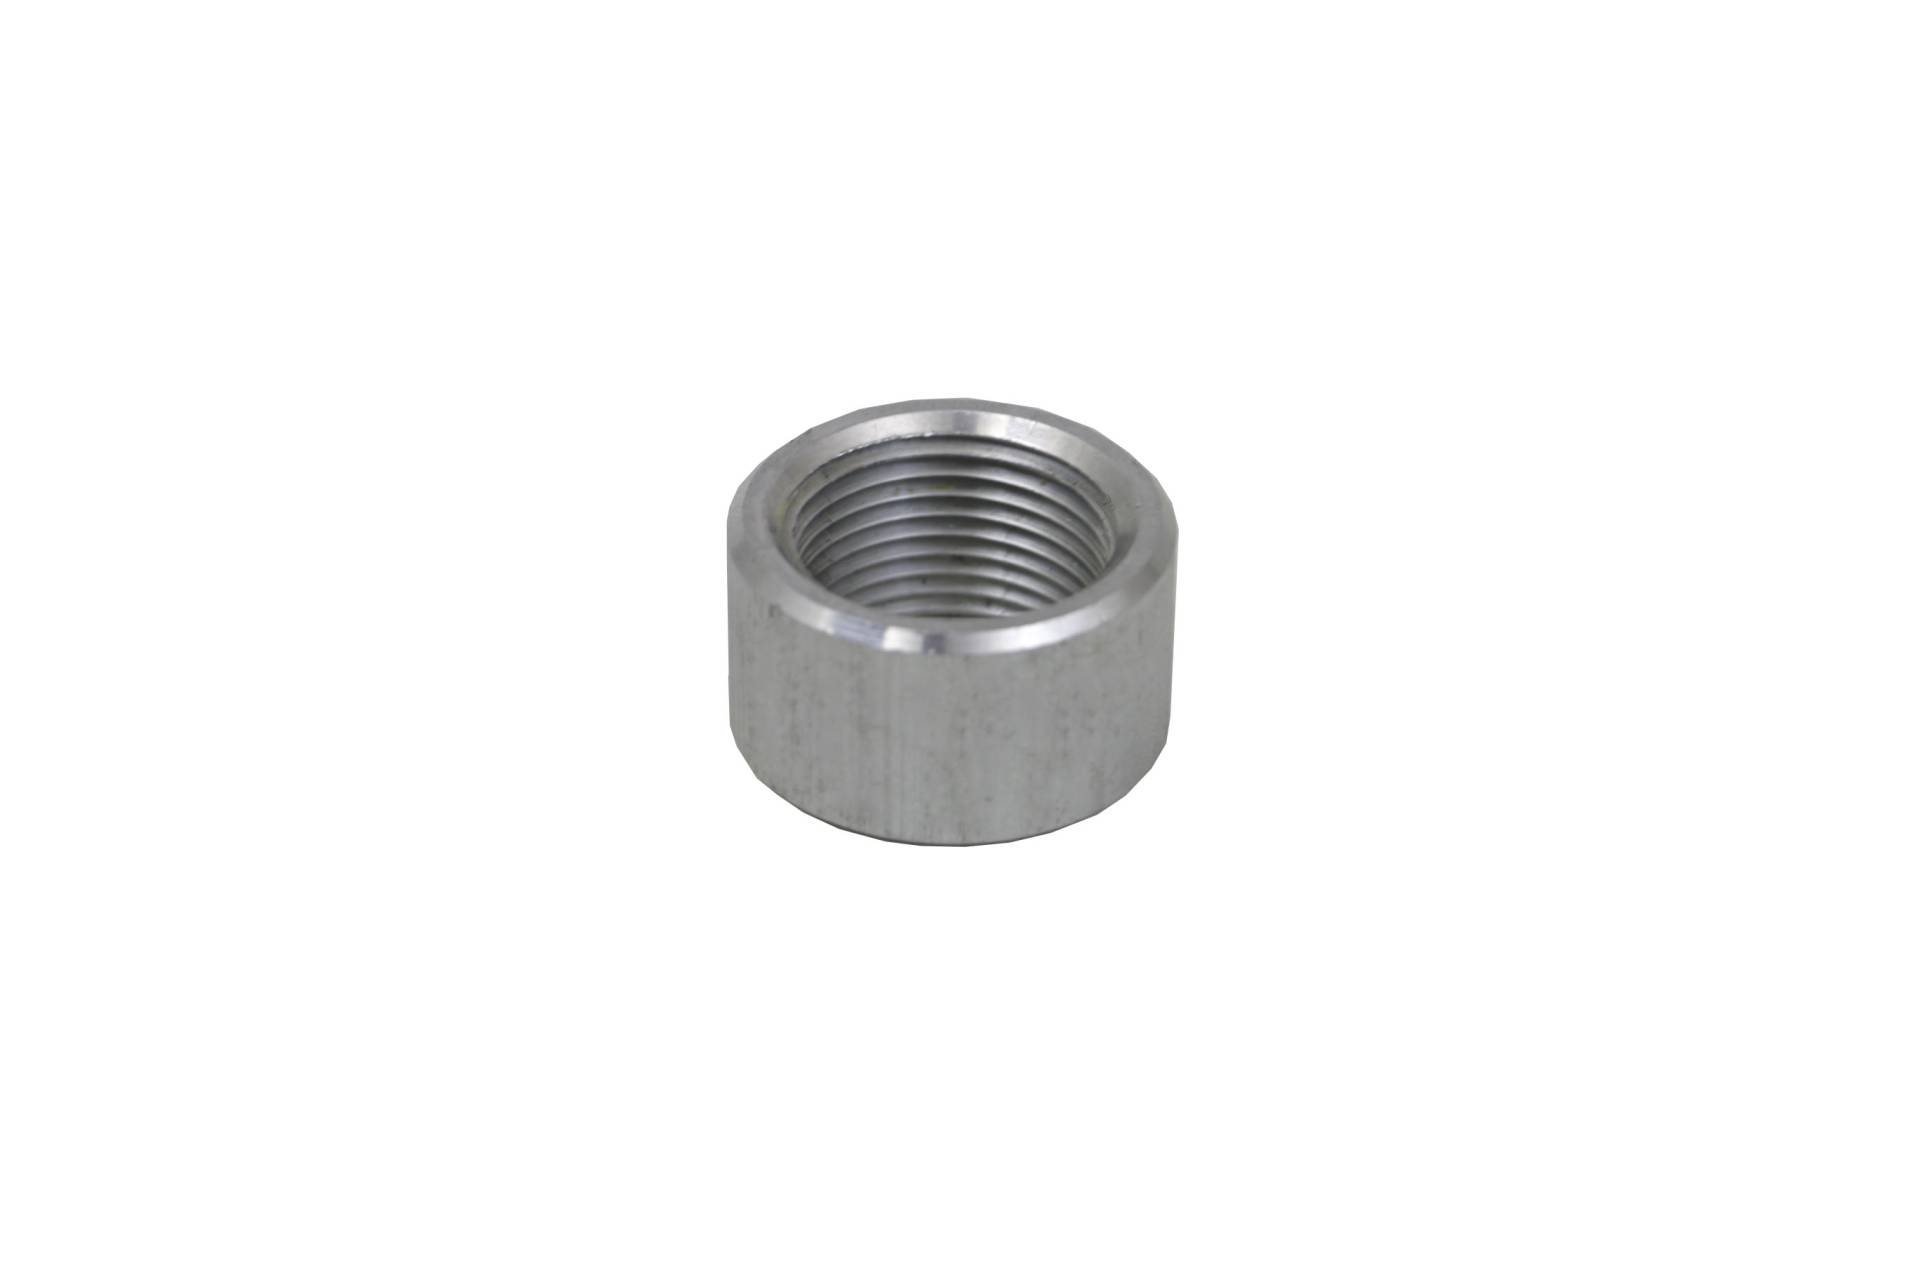 Wizard Cooling Inc - Weldable Pipe Thread Bungs 1" NPT Bung